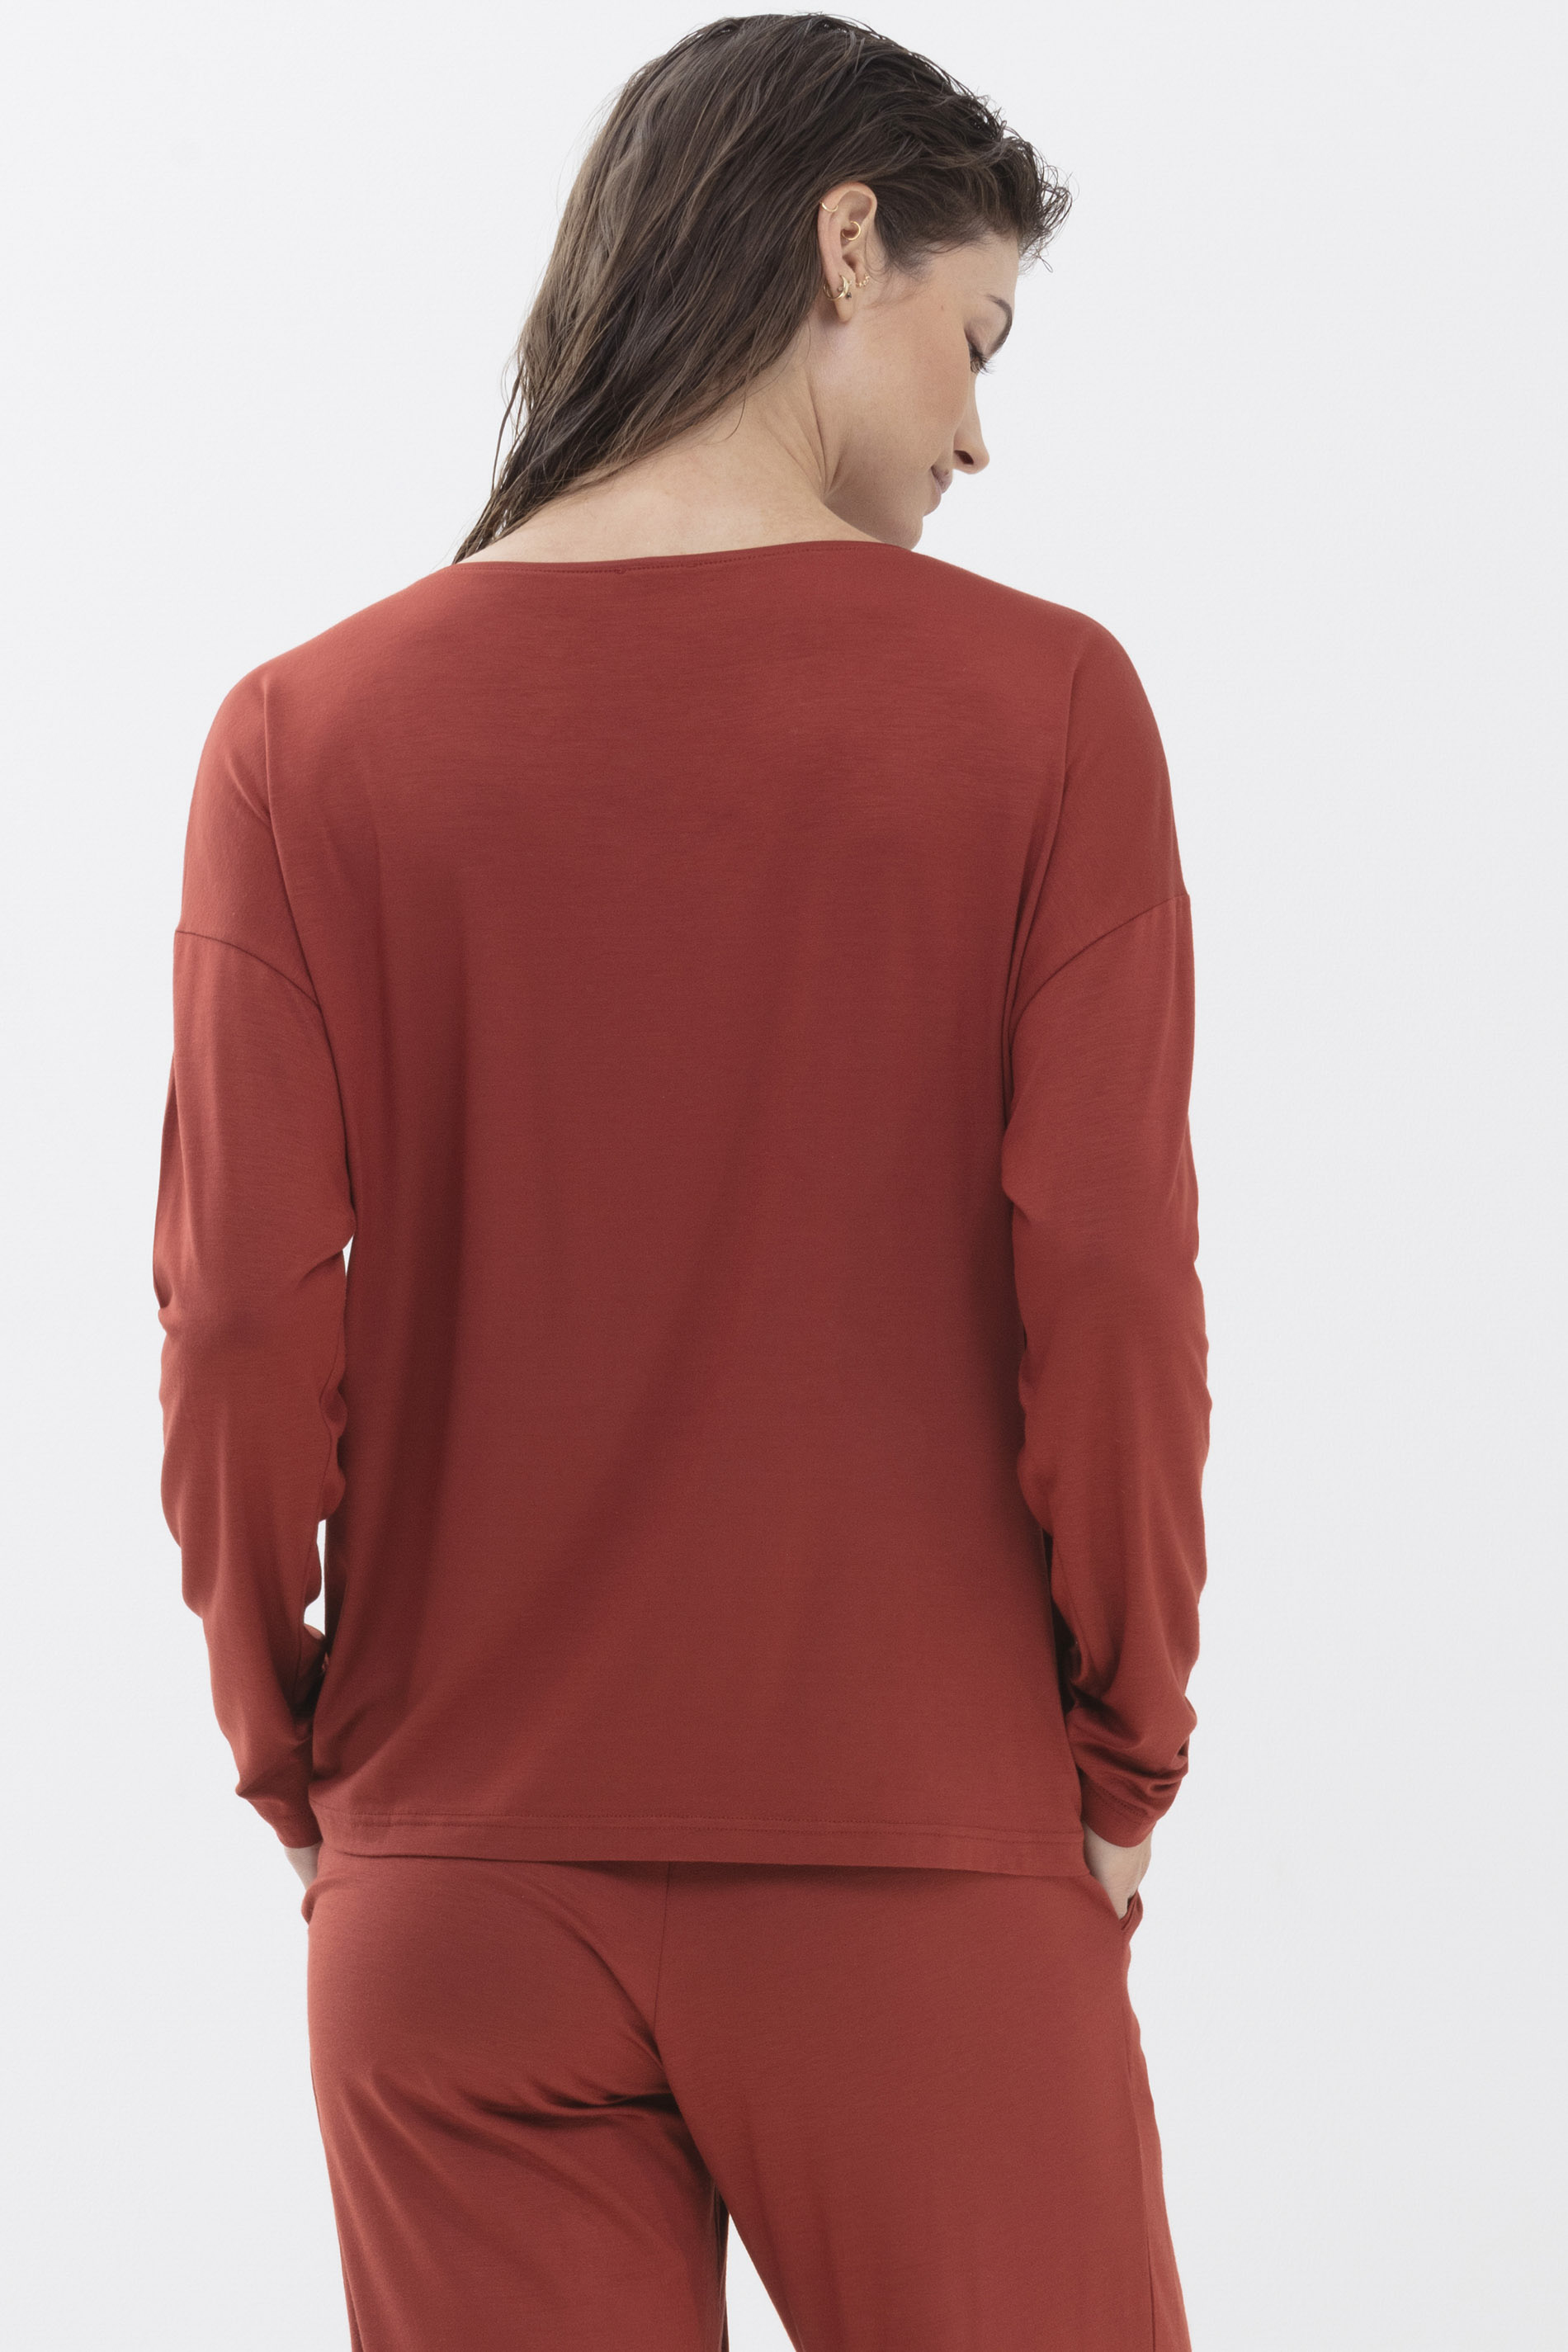 Shirt Red Pepper Serie Alena Rear View | mey®